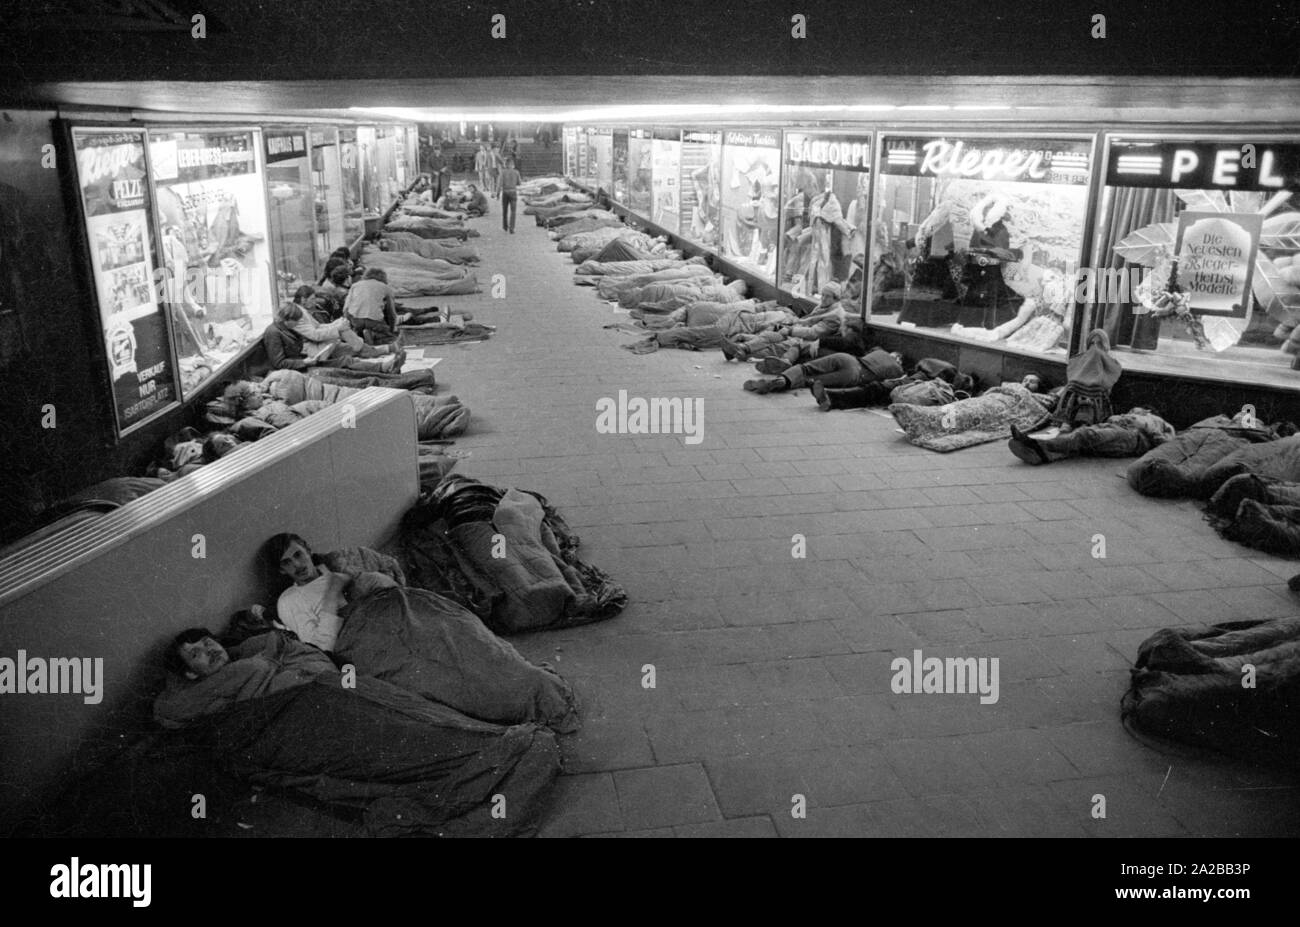 Homeless People Sleeping In The Mezzanine Floor At The Munich Main